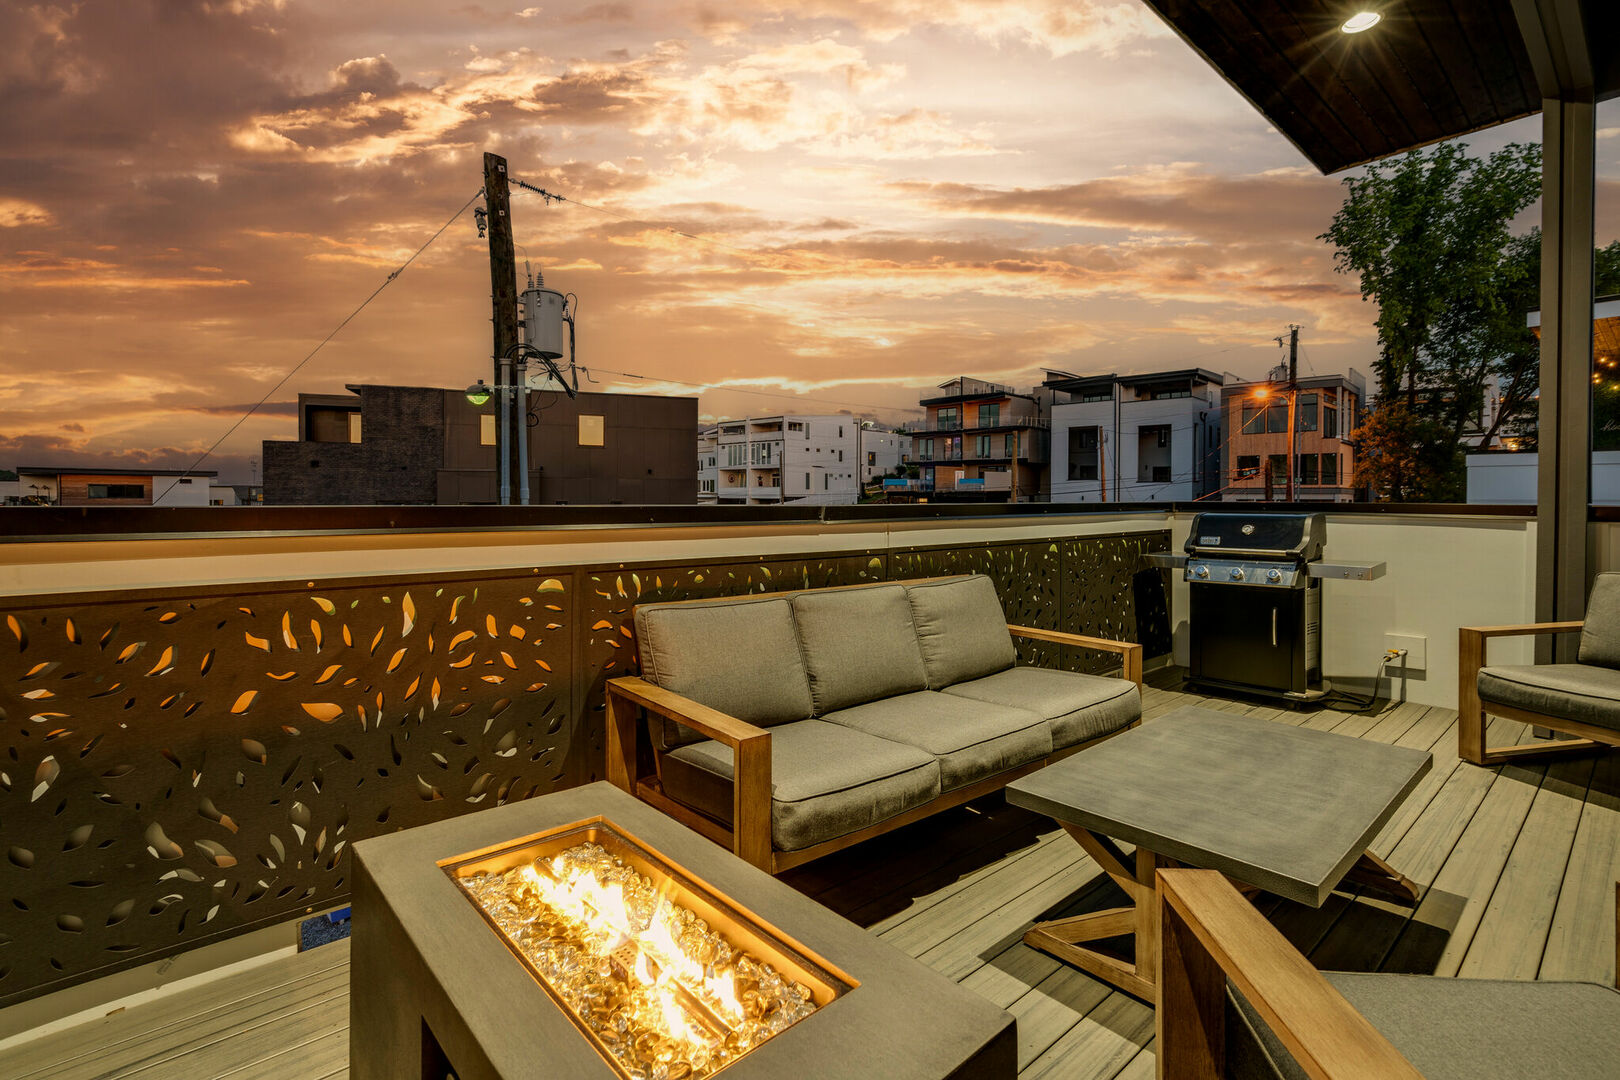 4th unit: Rooftop balcony with fire pit, smart TV, outdoor BBQ grill, and lounge area.